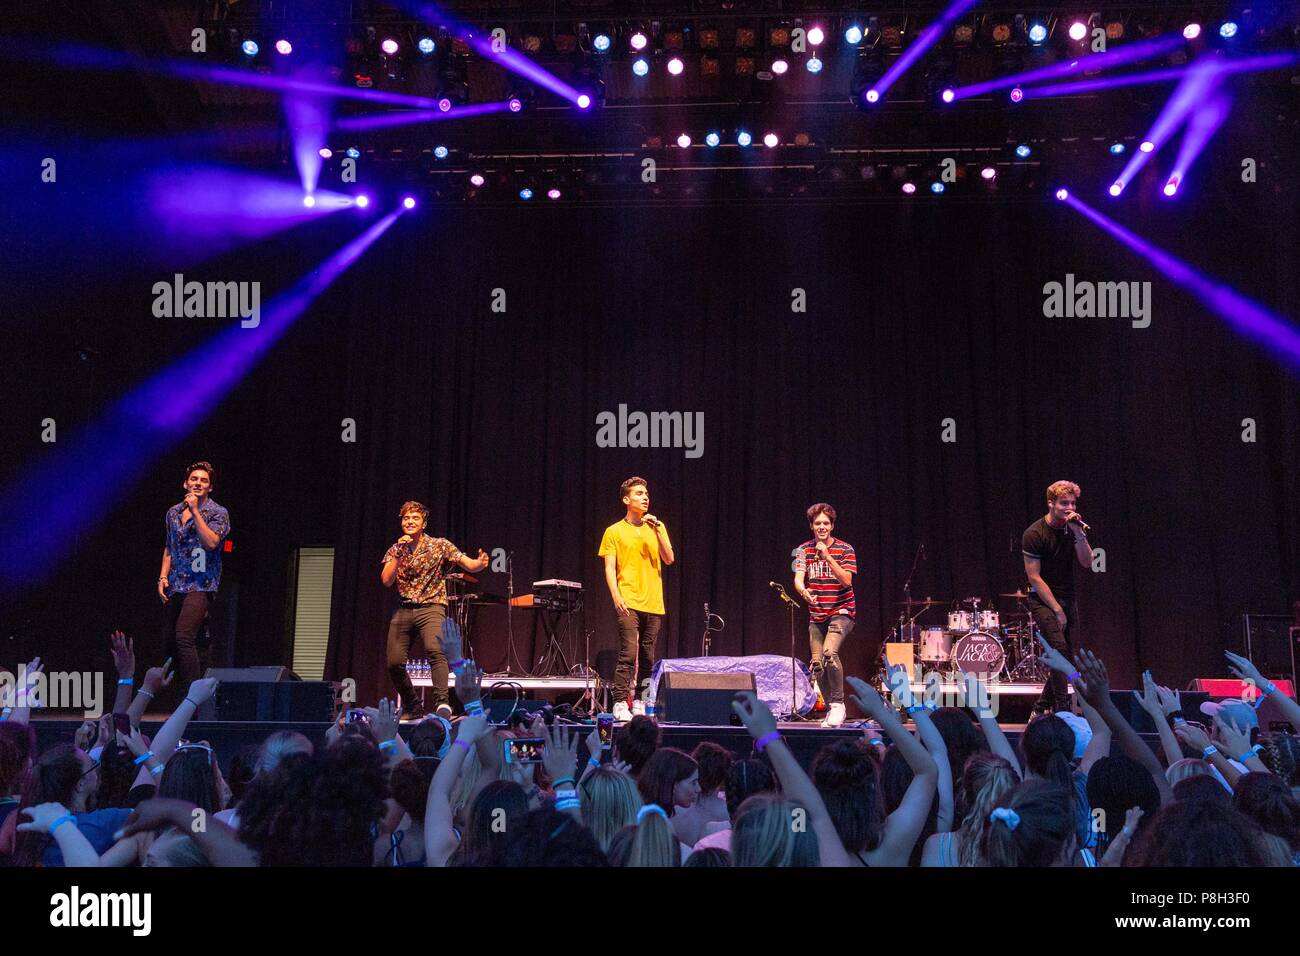 Milwaukee, Wisconsin, USA. 30th June, 2018. CHANCE PEREZ, SERGIO CALDERON, DREW RAMOS, MICHAEL CONOR and BRADY TUTTON of In Real Life during Summerfest Music Festival at Henry Maier Festival Park in Milwaukee, Wisconsin Credit: Daniel DeSlover/ZUMA Wire/Alamy Live News Stock Photo